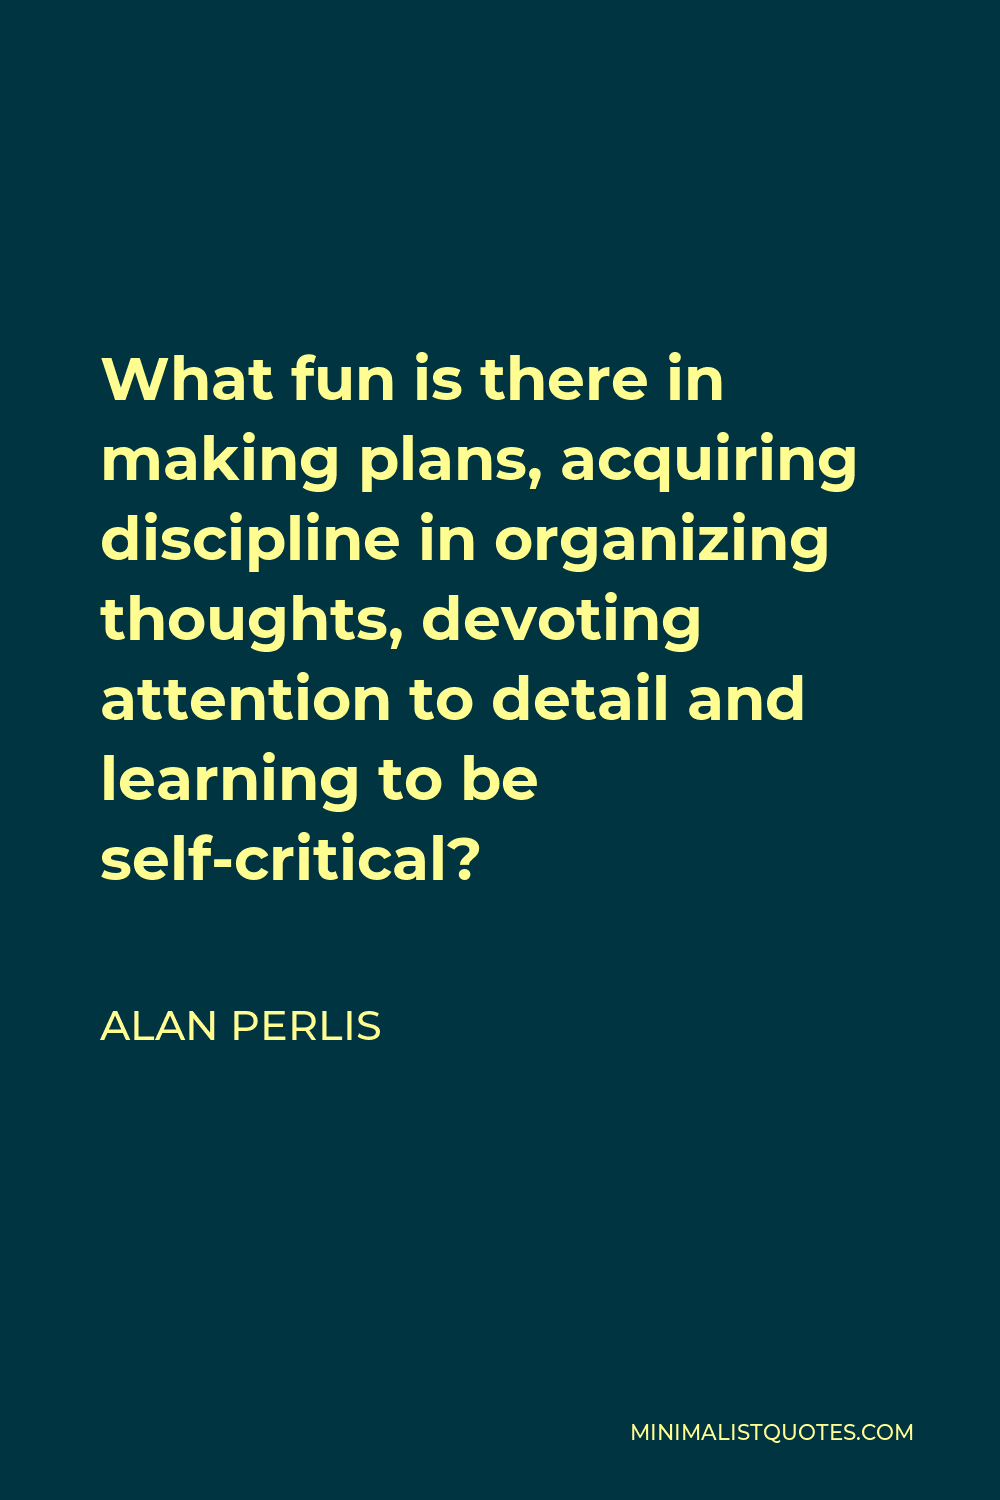 Alan Perlis Quote - What fun is there in making plans, acquiring discipline in organizing thoughts, devoting attention to detail and learning to be self-critical?